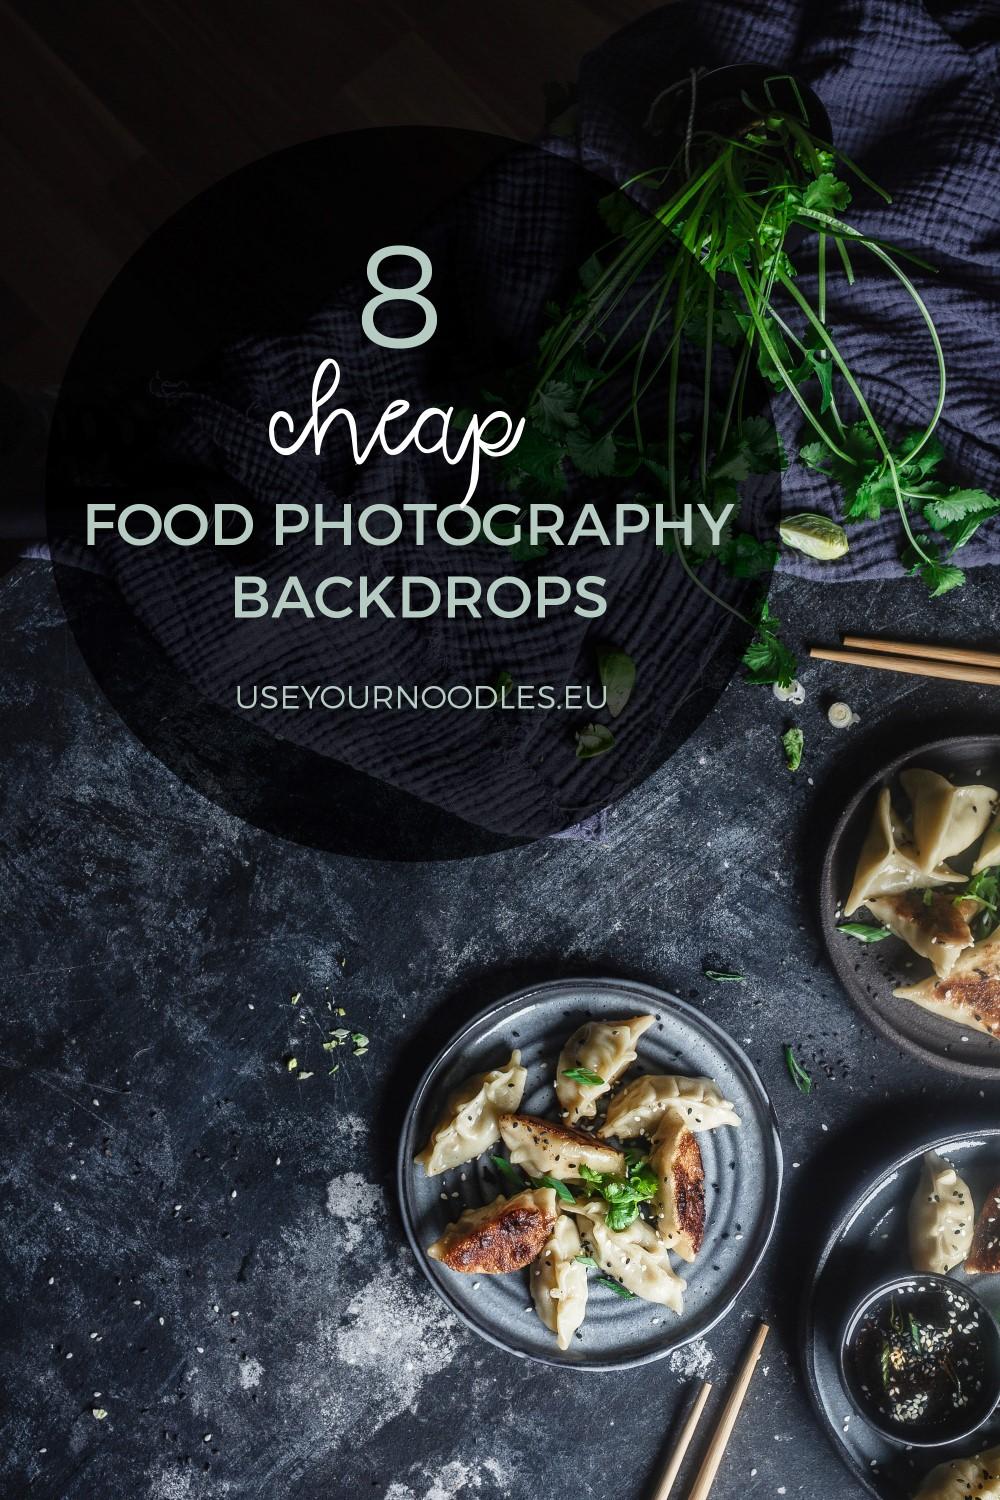 Healthy food background stock photo containing food and background  Food  Images  Creative Market